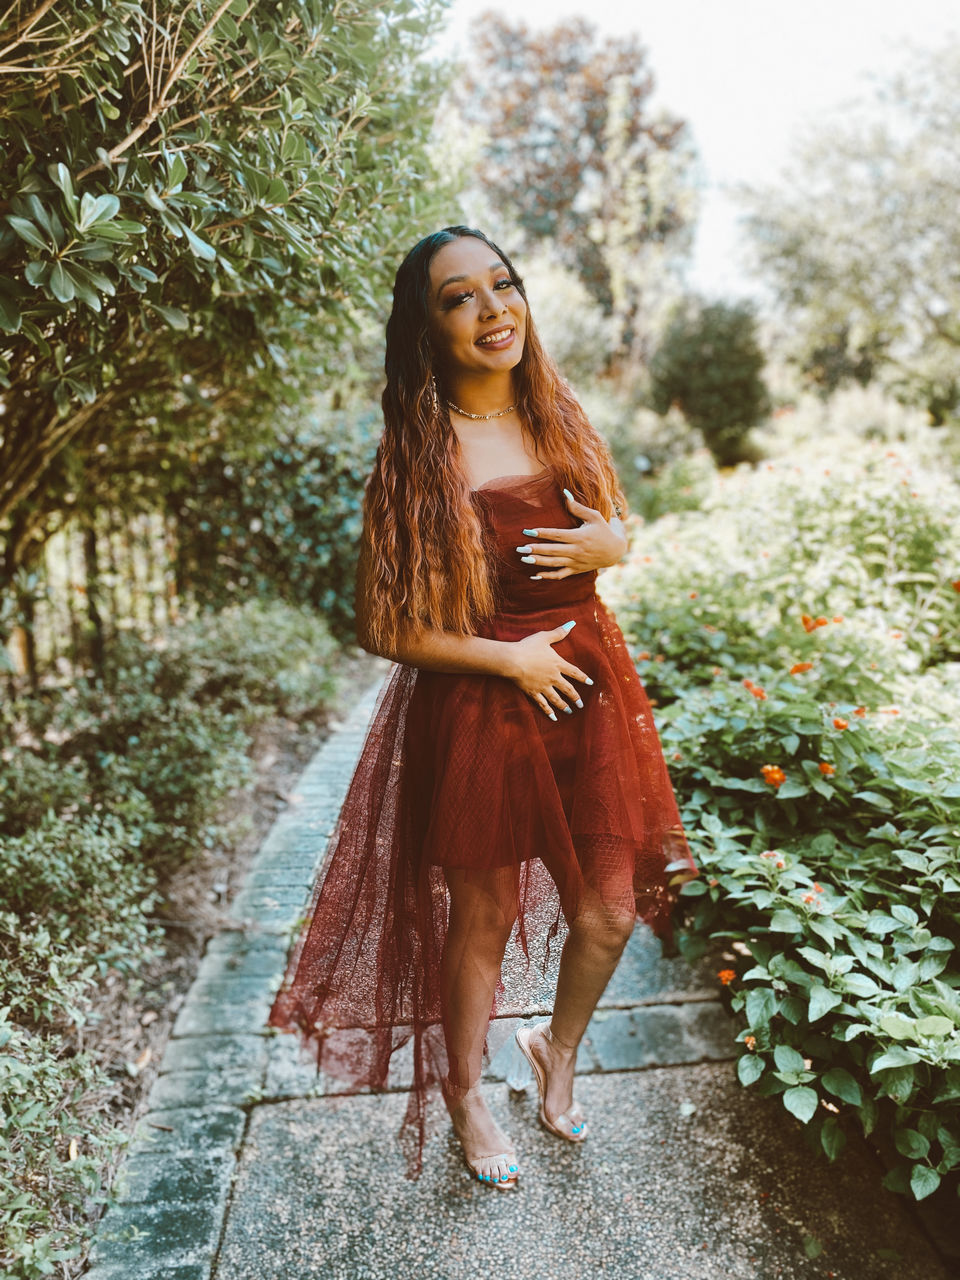 women, long hair, one person, hairstyle, adult, young adult, fashion, clothing, plant, nature, dress, portrait, tree, full length, spring, photo shoot, smiling, brown hair, happiness, looking, standing, autumn, outdoors, beauty in nature, lifestyles, female, emotion, elegance, redhead, leisure activity, looking at camera, front view, forest, flower, day, summer, land, contemplation, cheerful, arts culture and entertainment, flowering plant